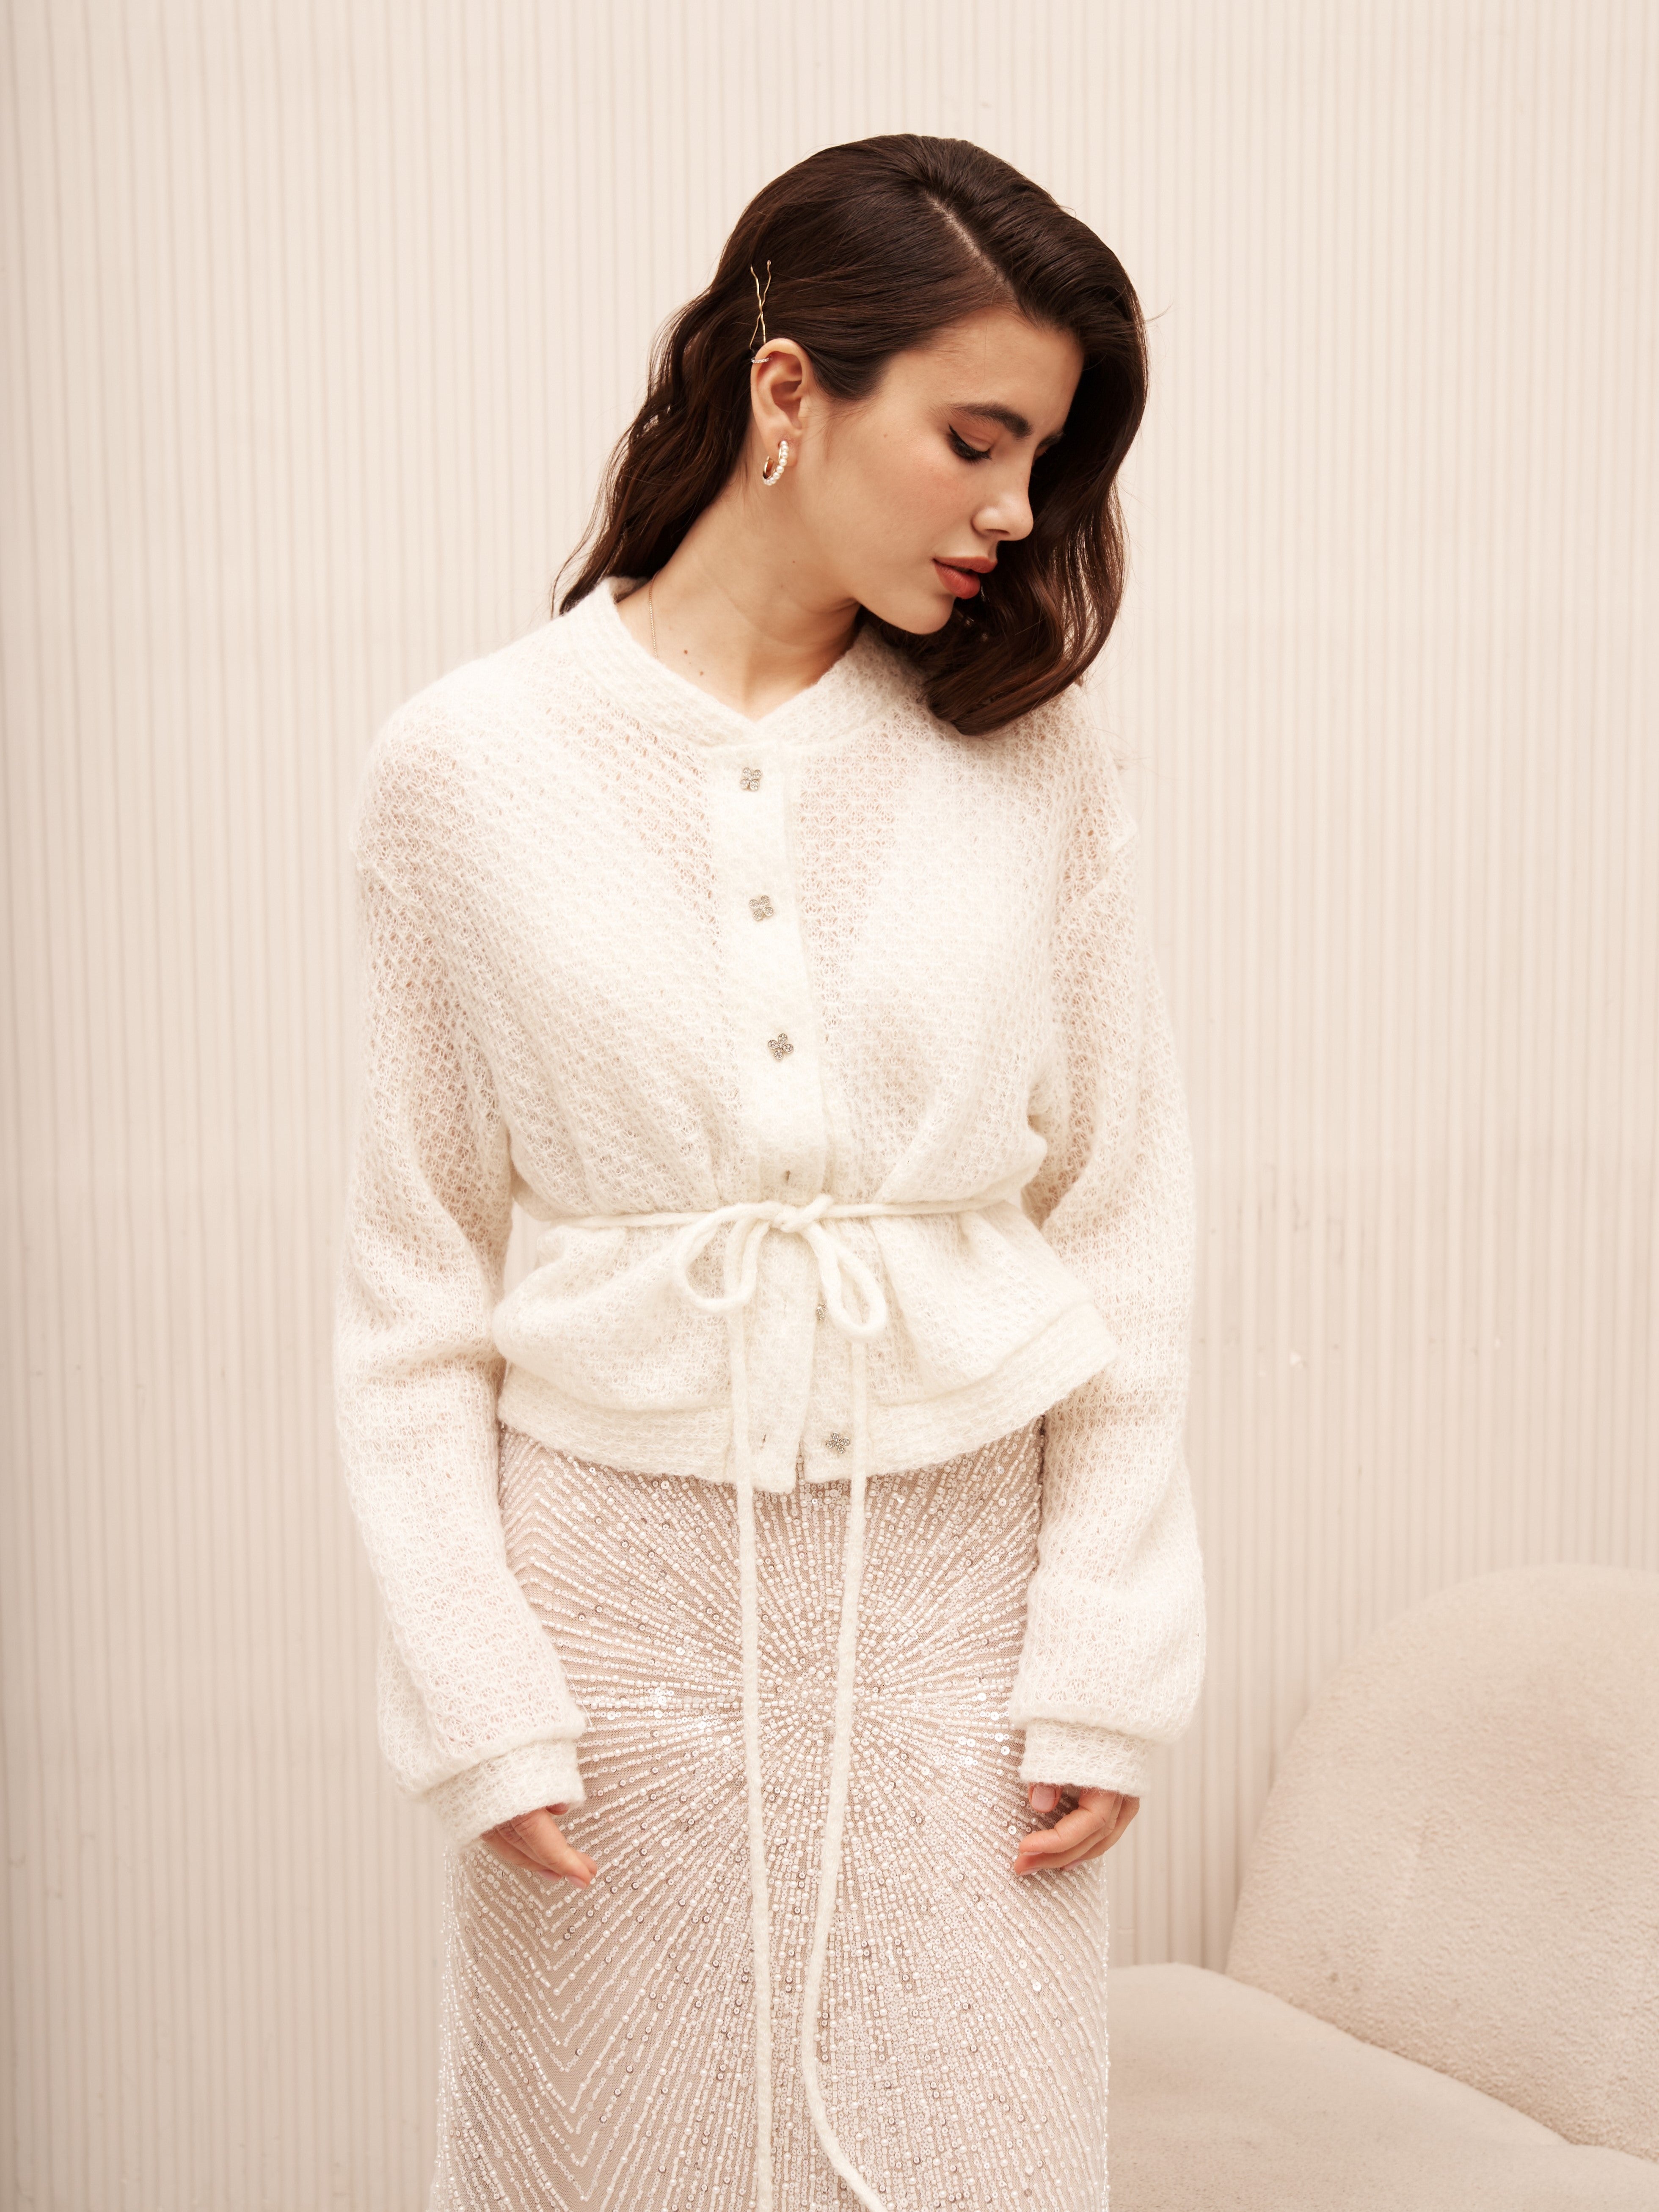 Ivory Bridal Cardigan with Floral Accent Buttons and Belt